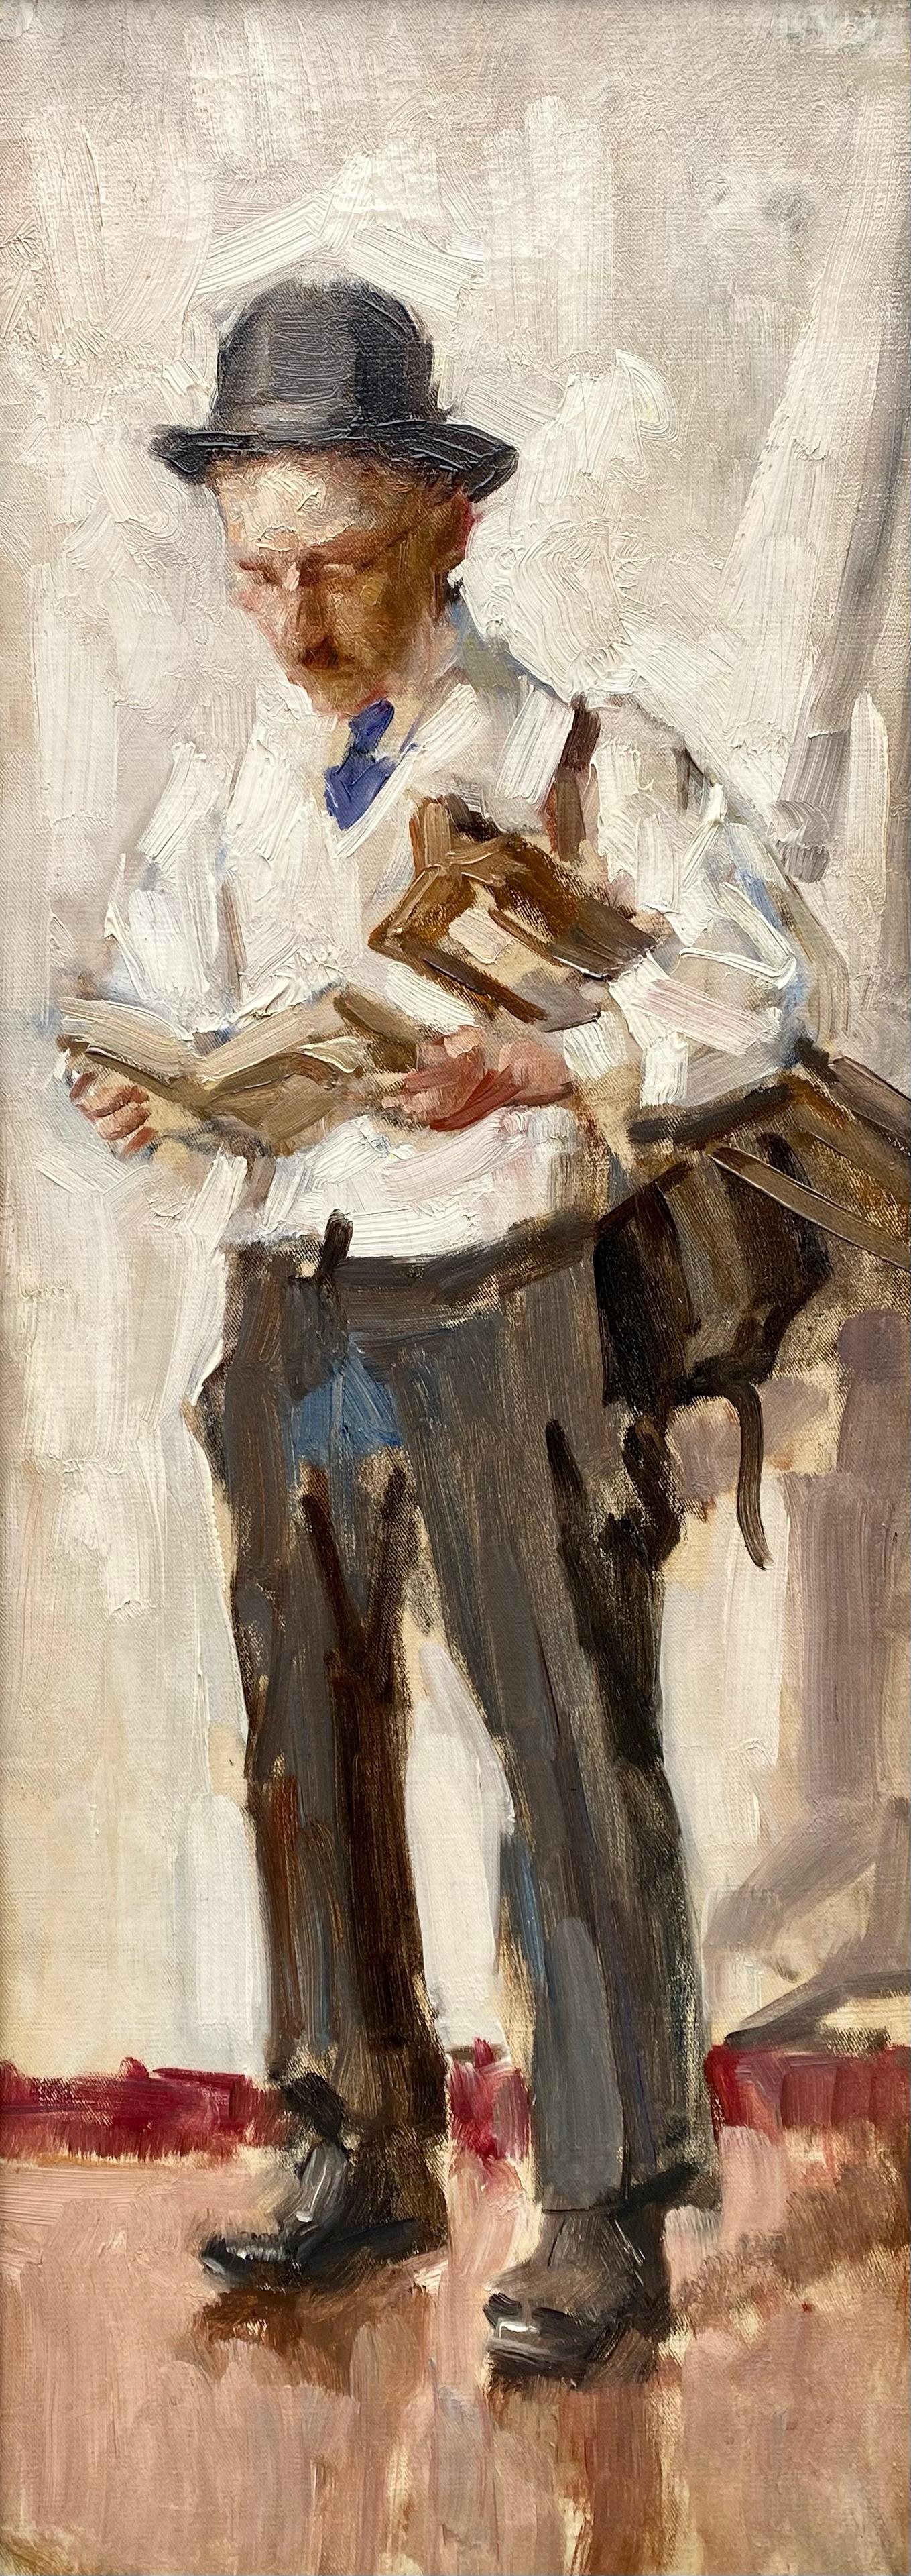 Jean Laudy
Venlo 1877 – 1877 Sint-Lambrechts-Woluwe
Dutch-Belgian Painter

'Man with a Book'
Signature: Signed top right and on revers 
Medium: Oil on canvas
Dimensions: Image size 82 x 30,50 cm, frame size 91 x 39 cm

Biography: Laudy Jean, born on